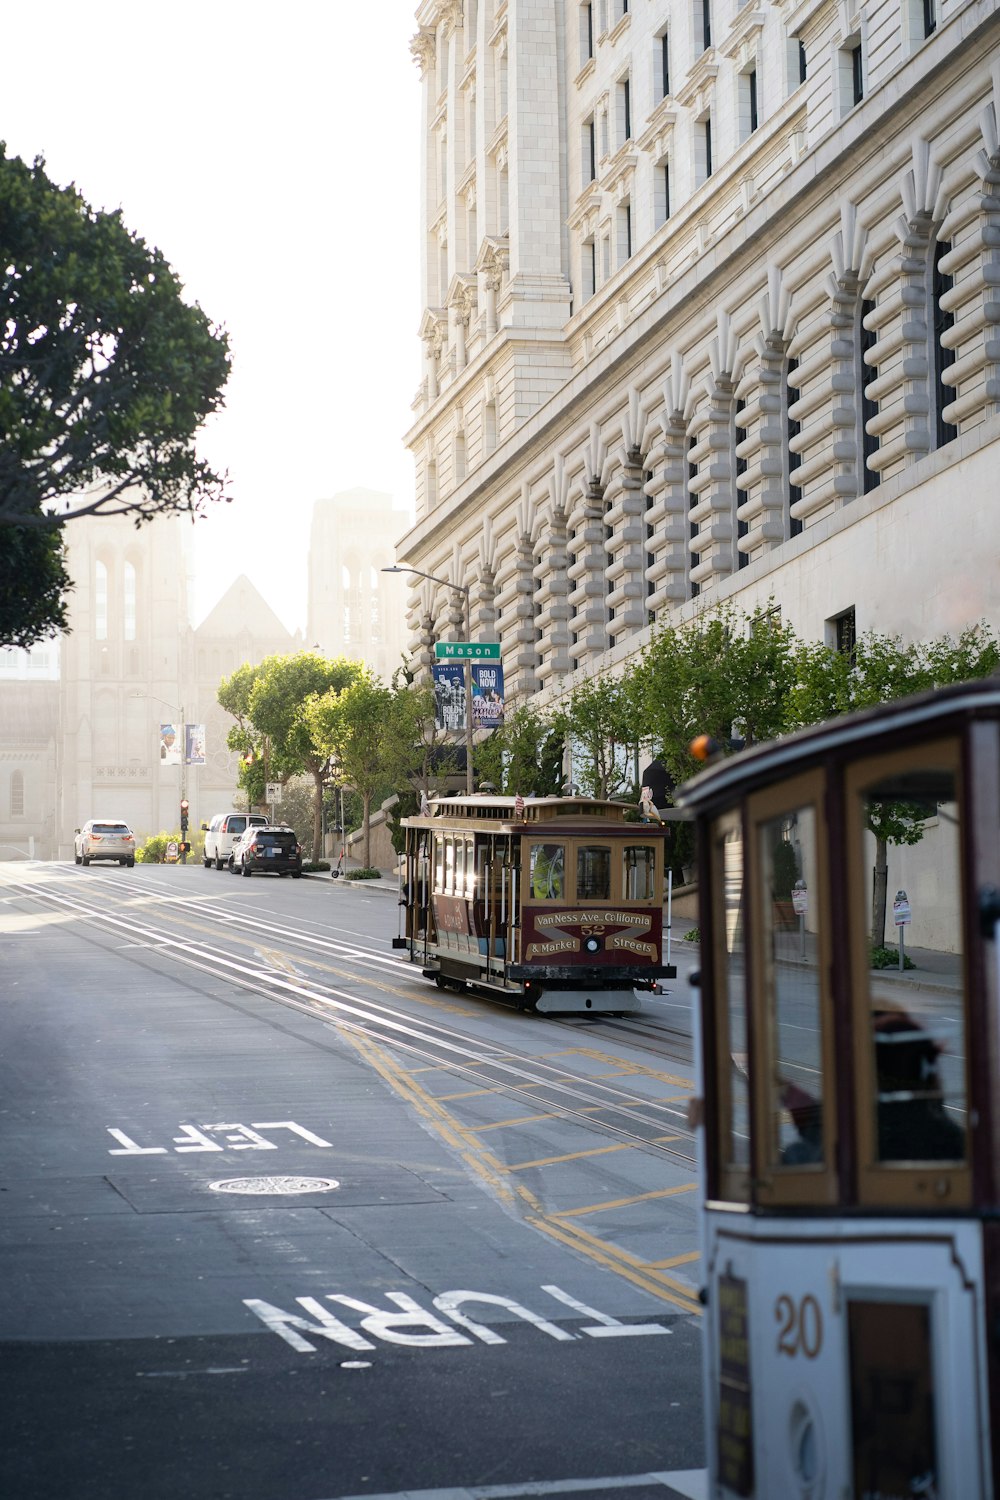 A trolley car driving down a street next to tall buildings photo – Free  Californie Image on Unsplash